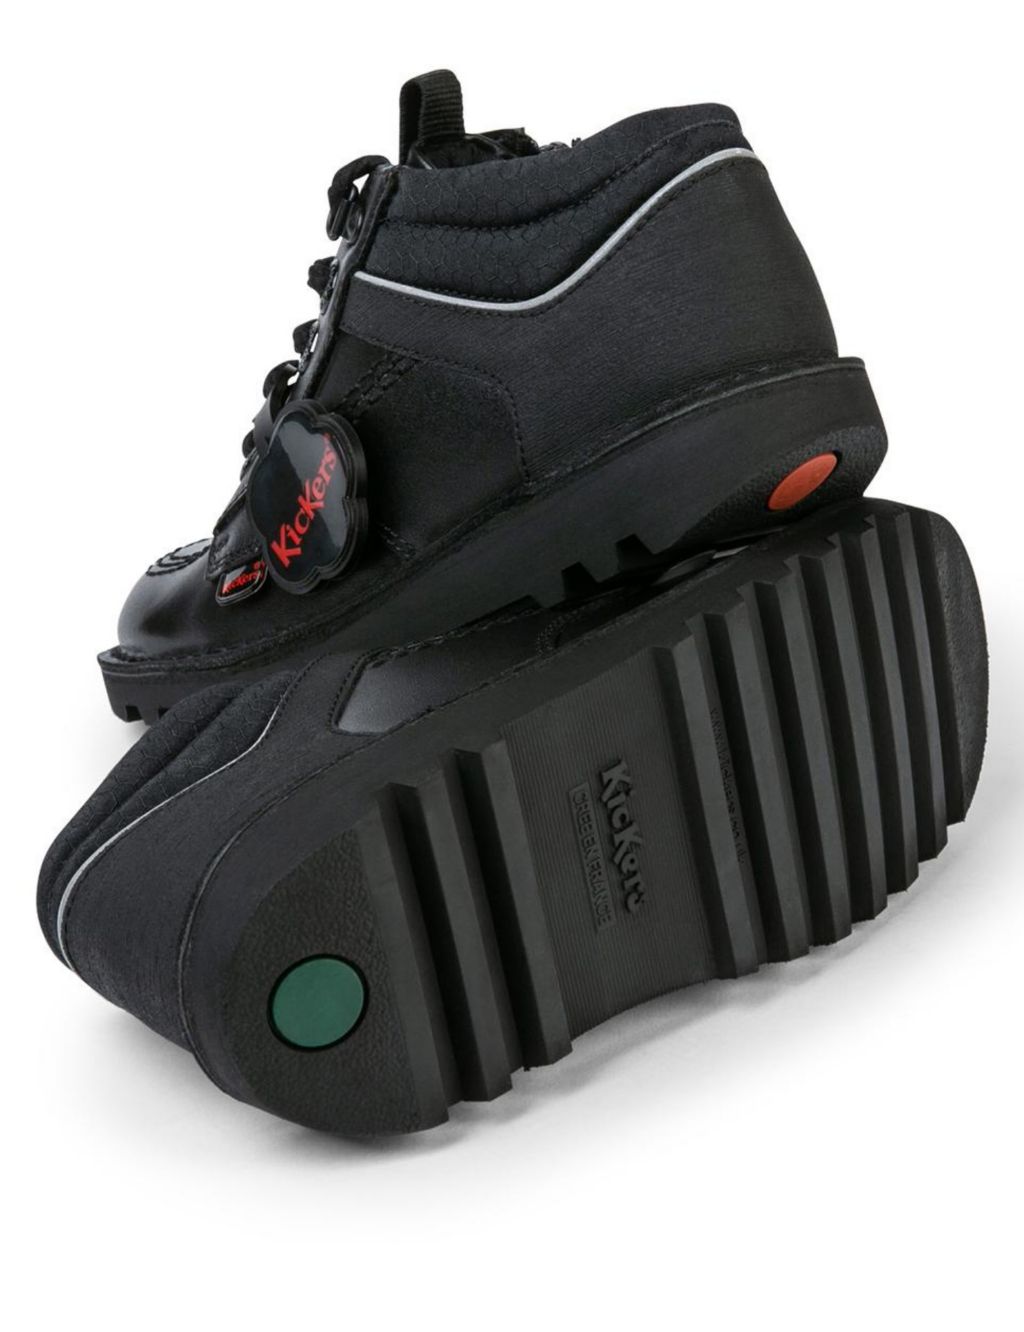 Kids' Patent High Top School Shoes image 4